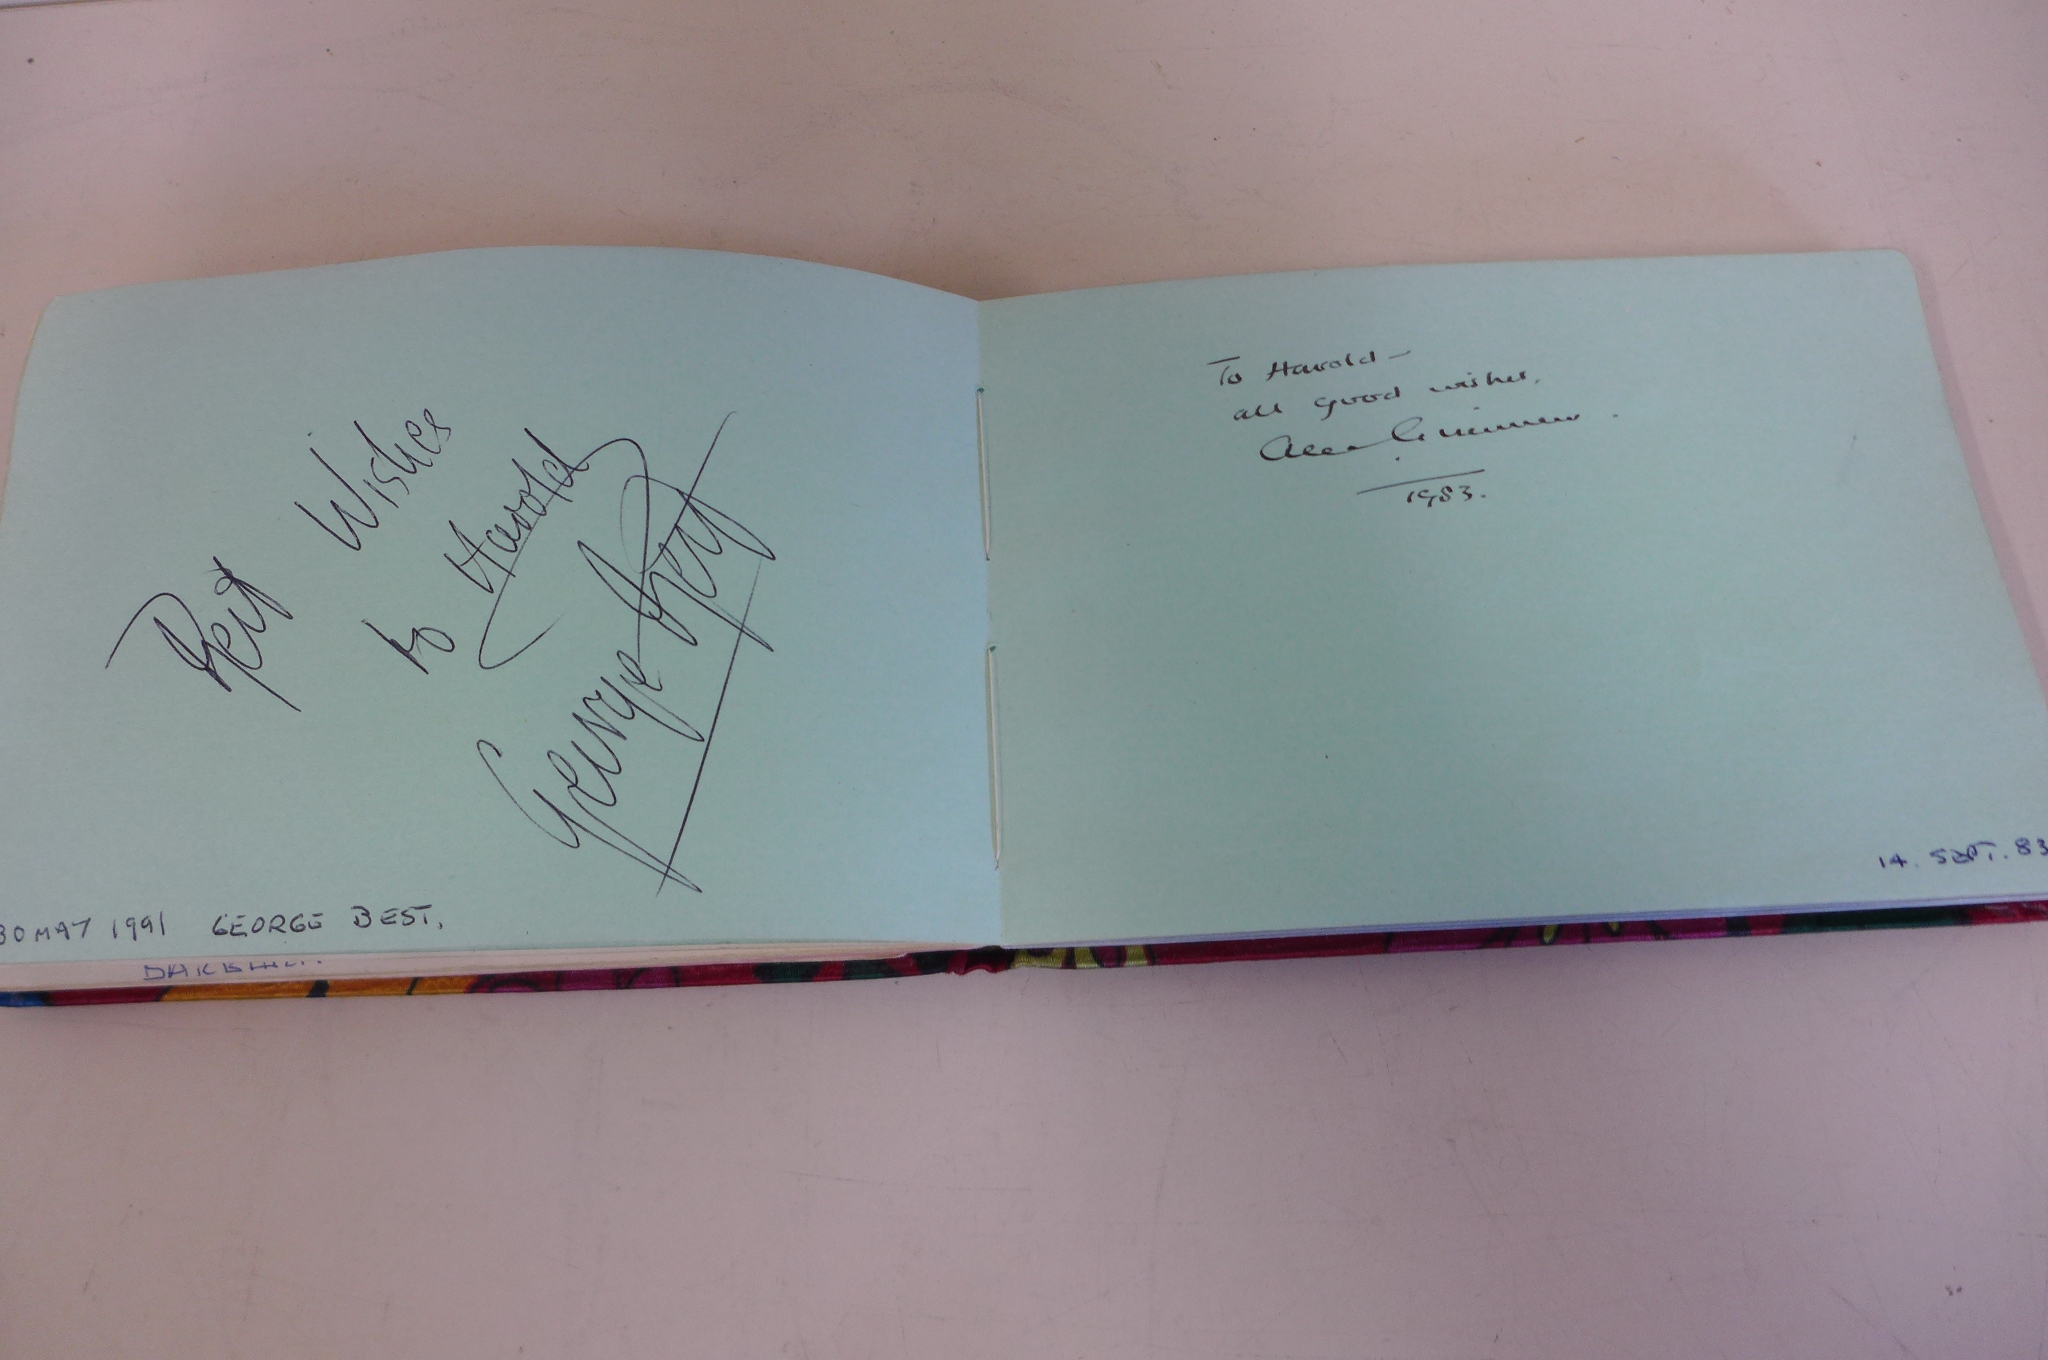 An interesting autograph book with autographs, including Topol, Christopher Lee, Ava Gardner, - Image 9 of 11